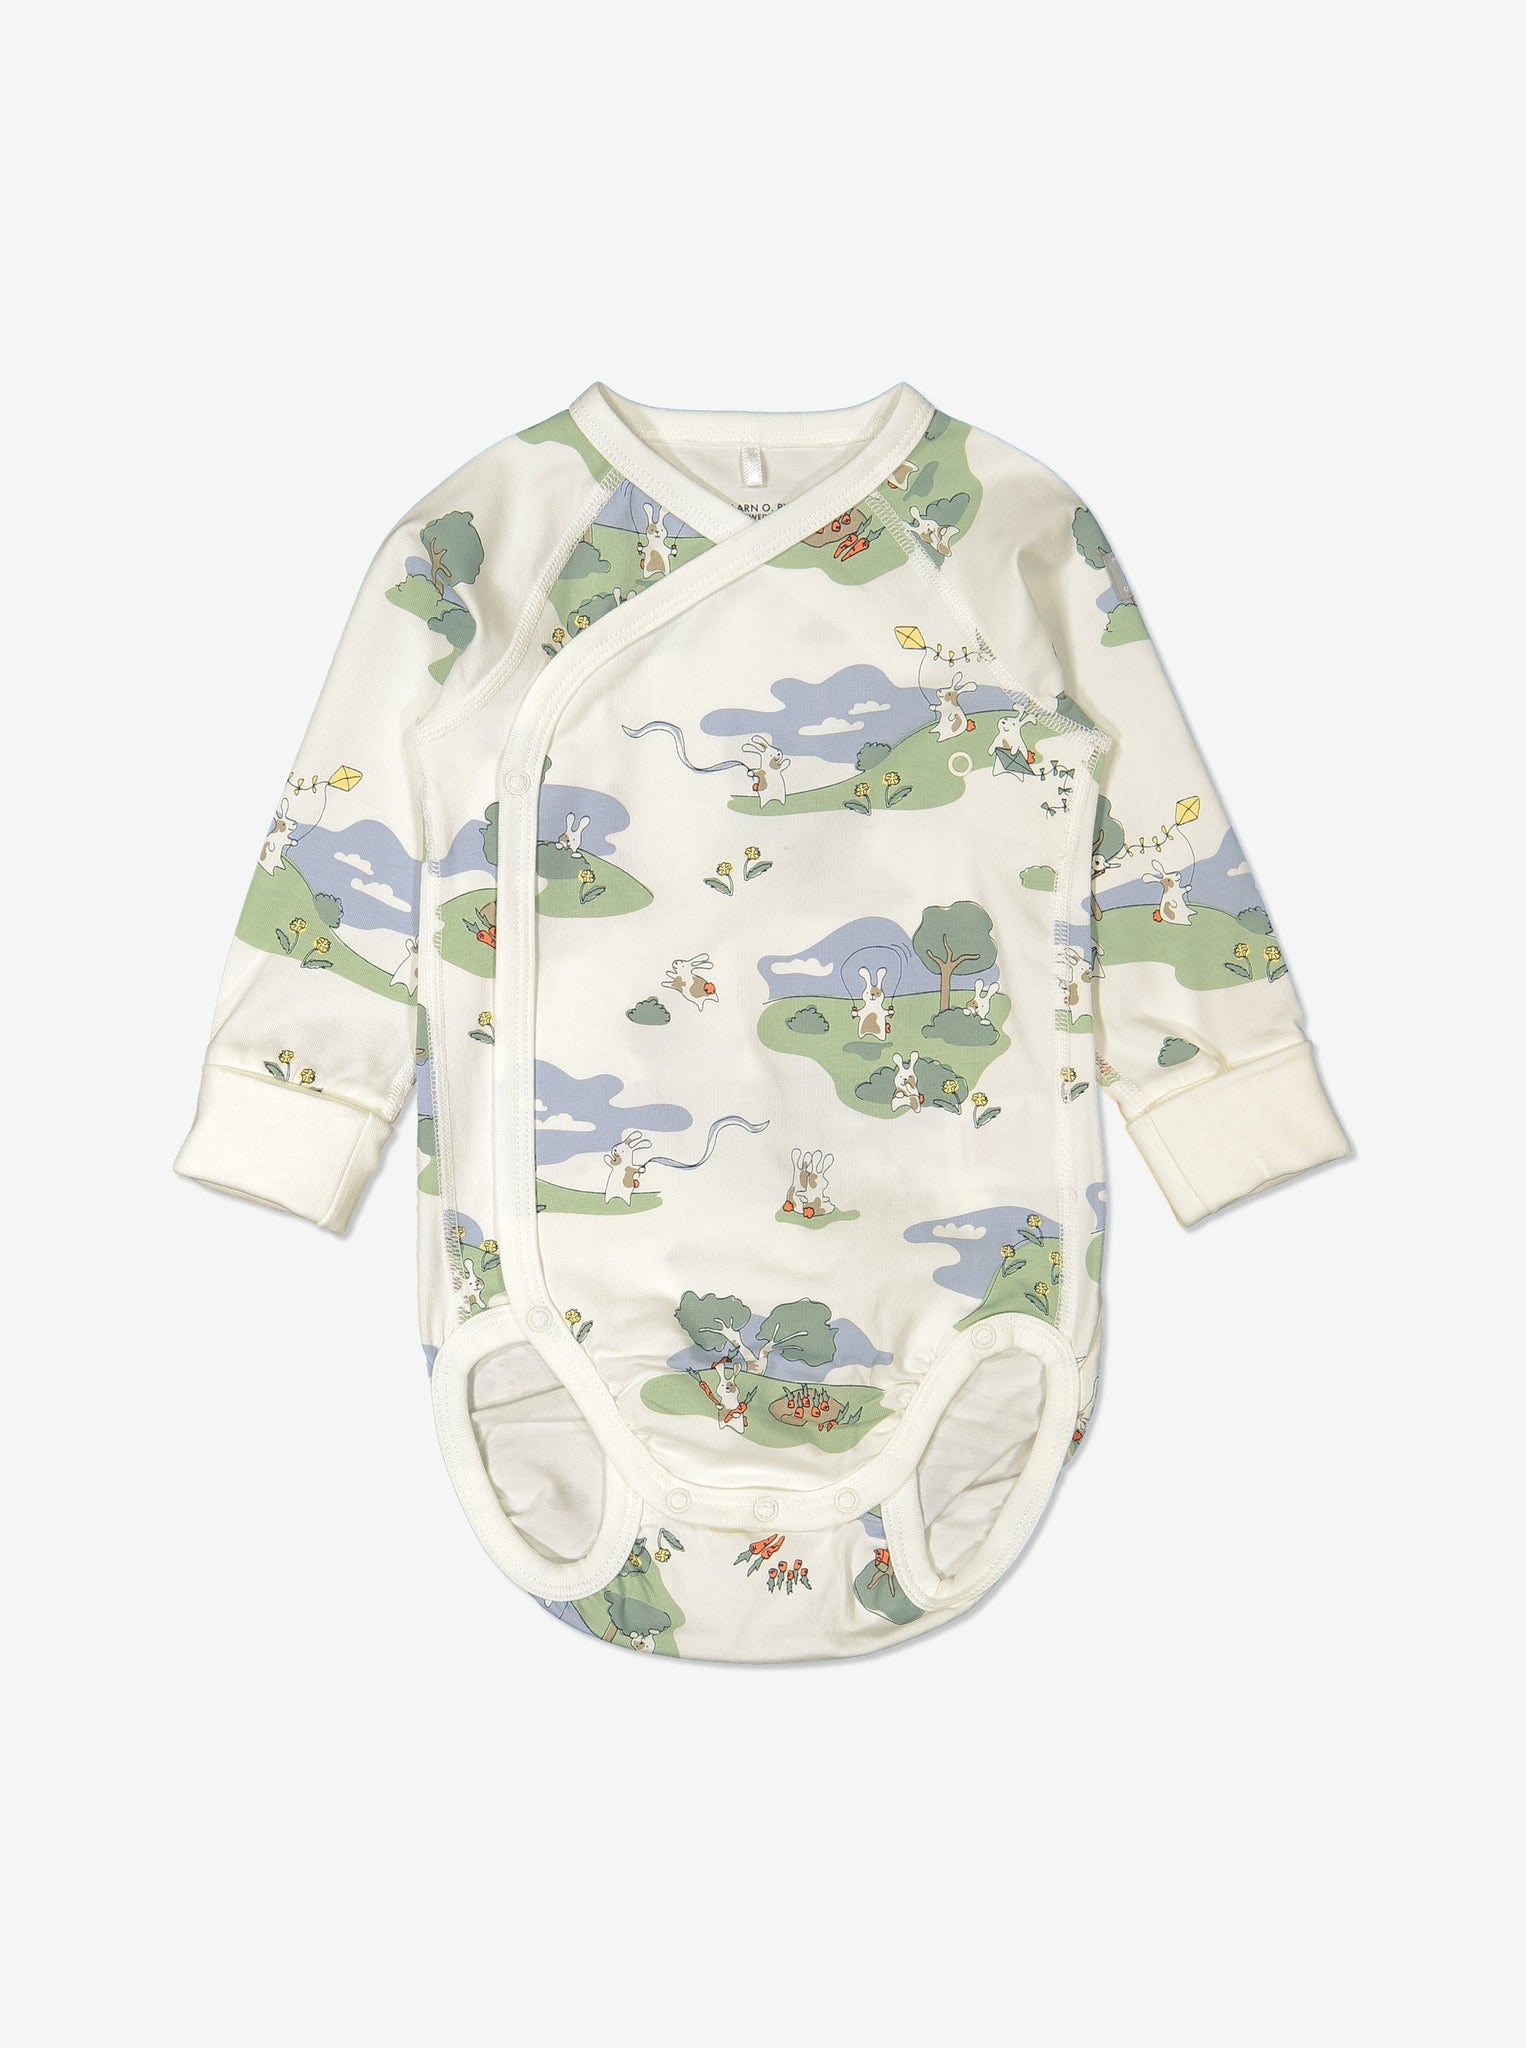 Bunny print babygrow for newborn babies in a wraparound style, made from 100% organic cotton fabric